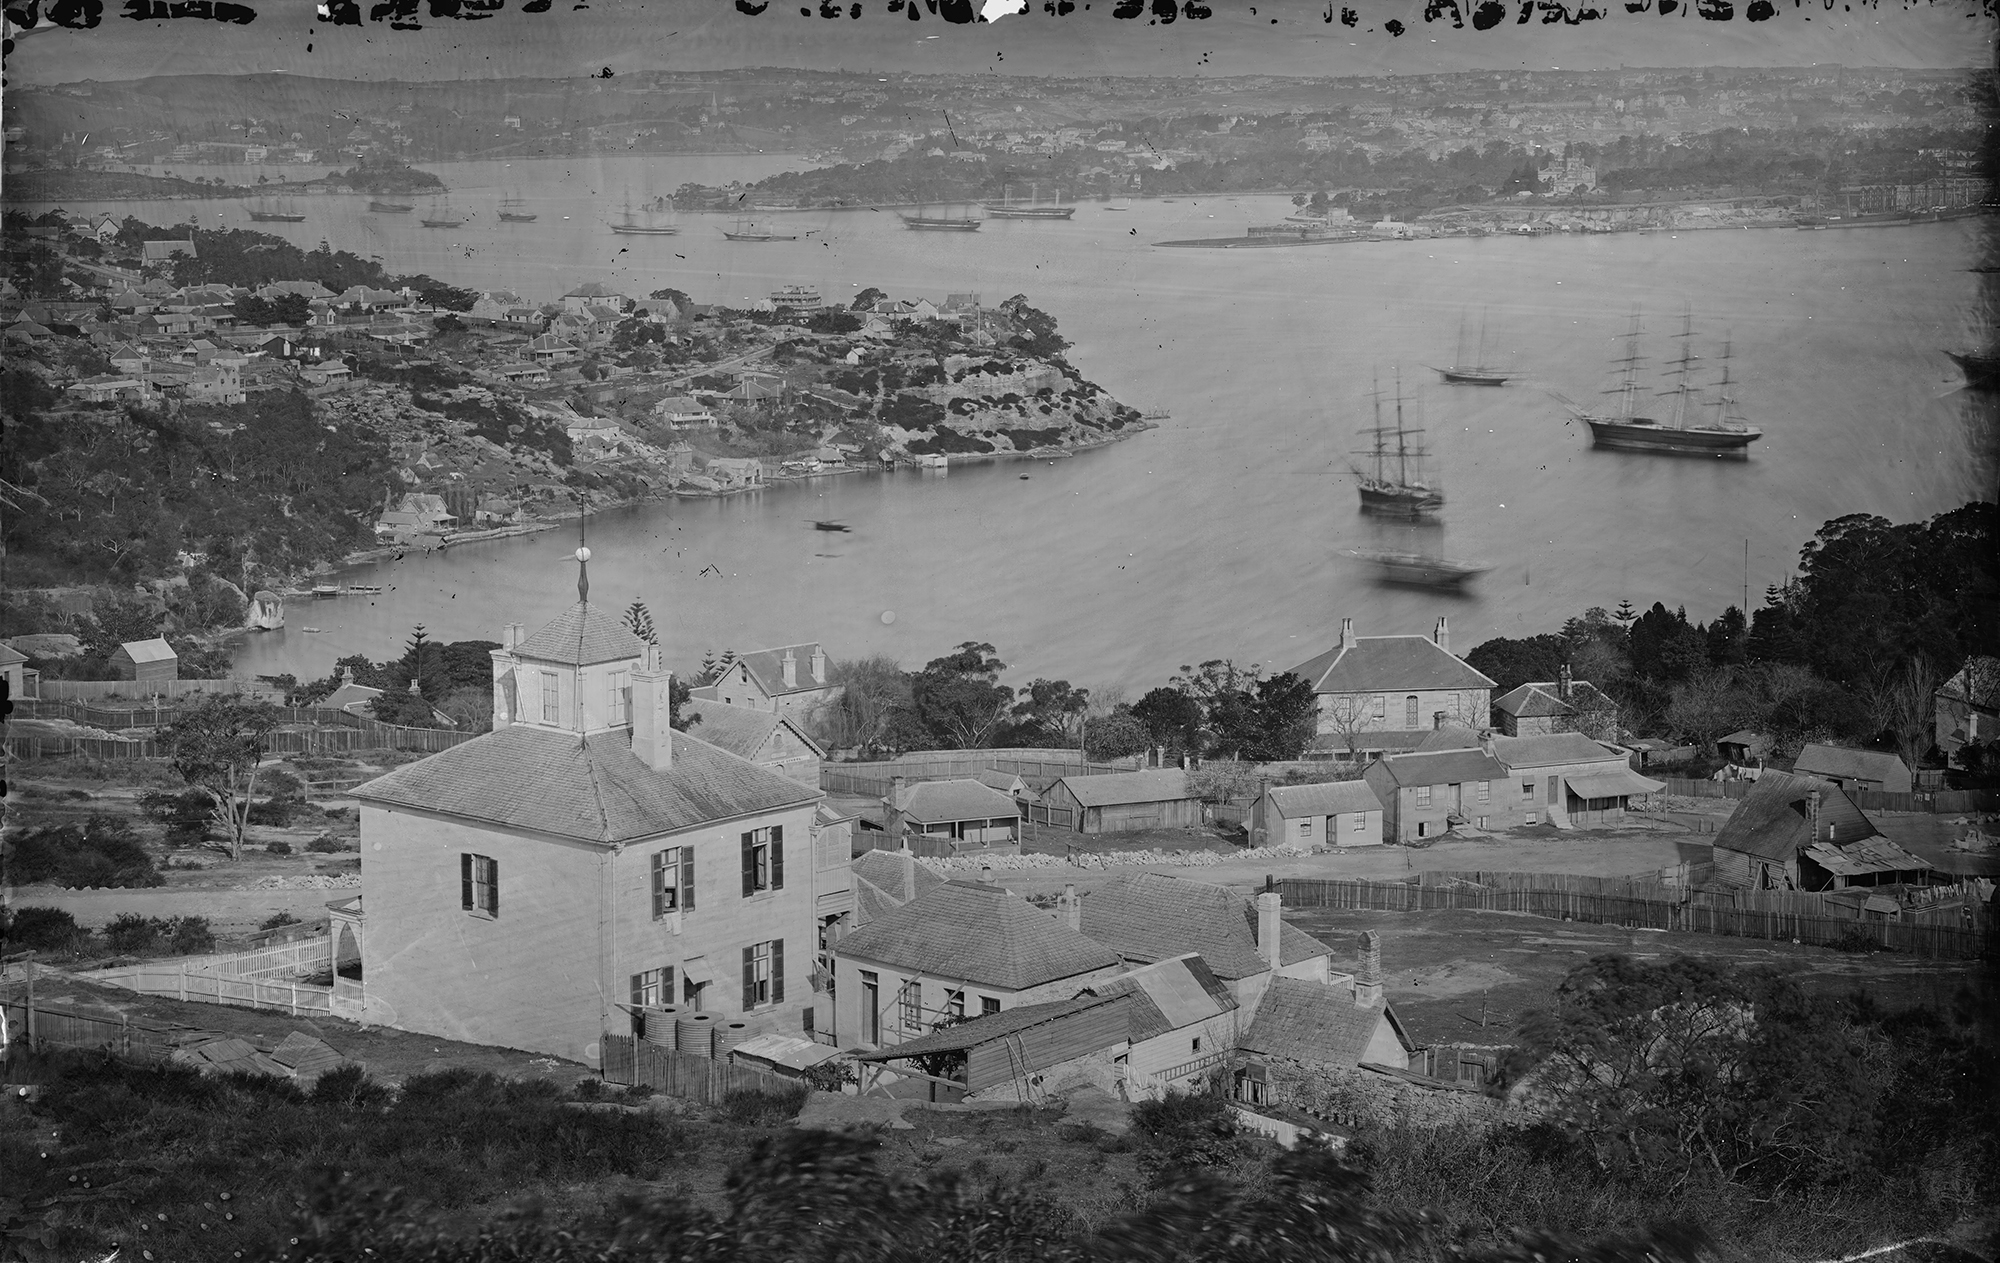 Restored panorama of Sydney from the Holtermann collection. 